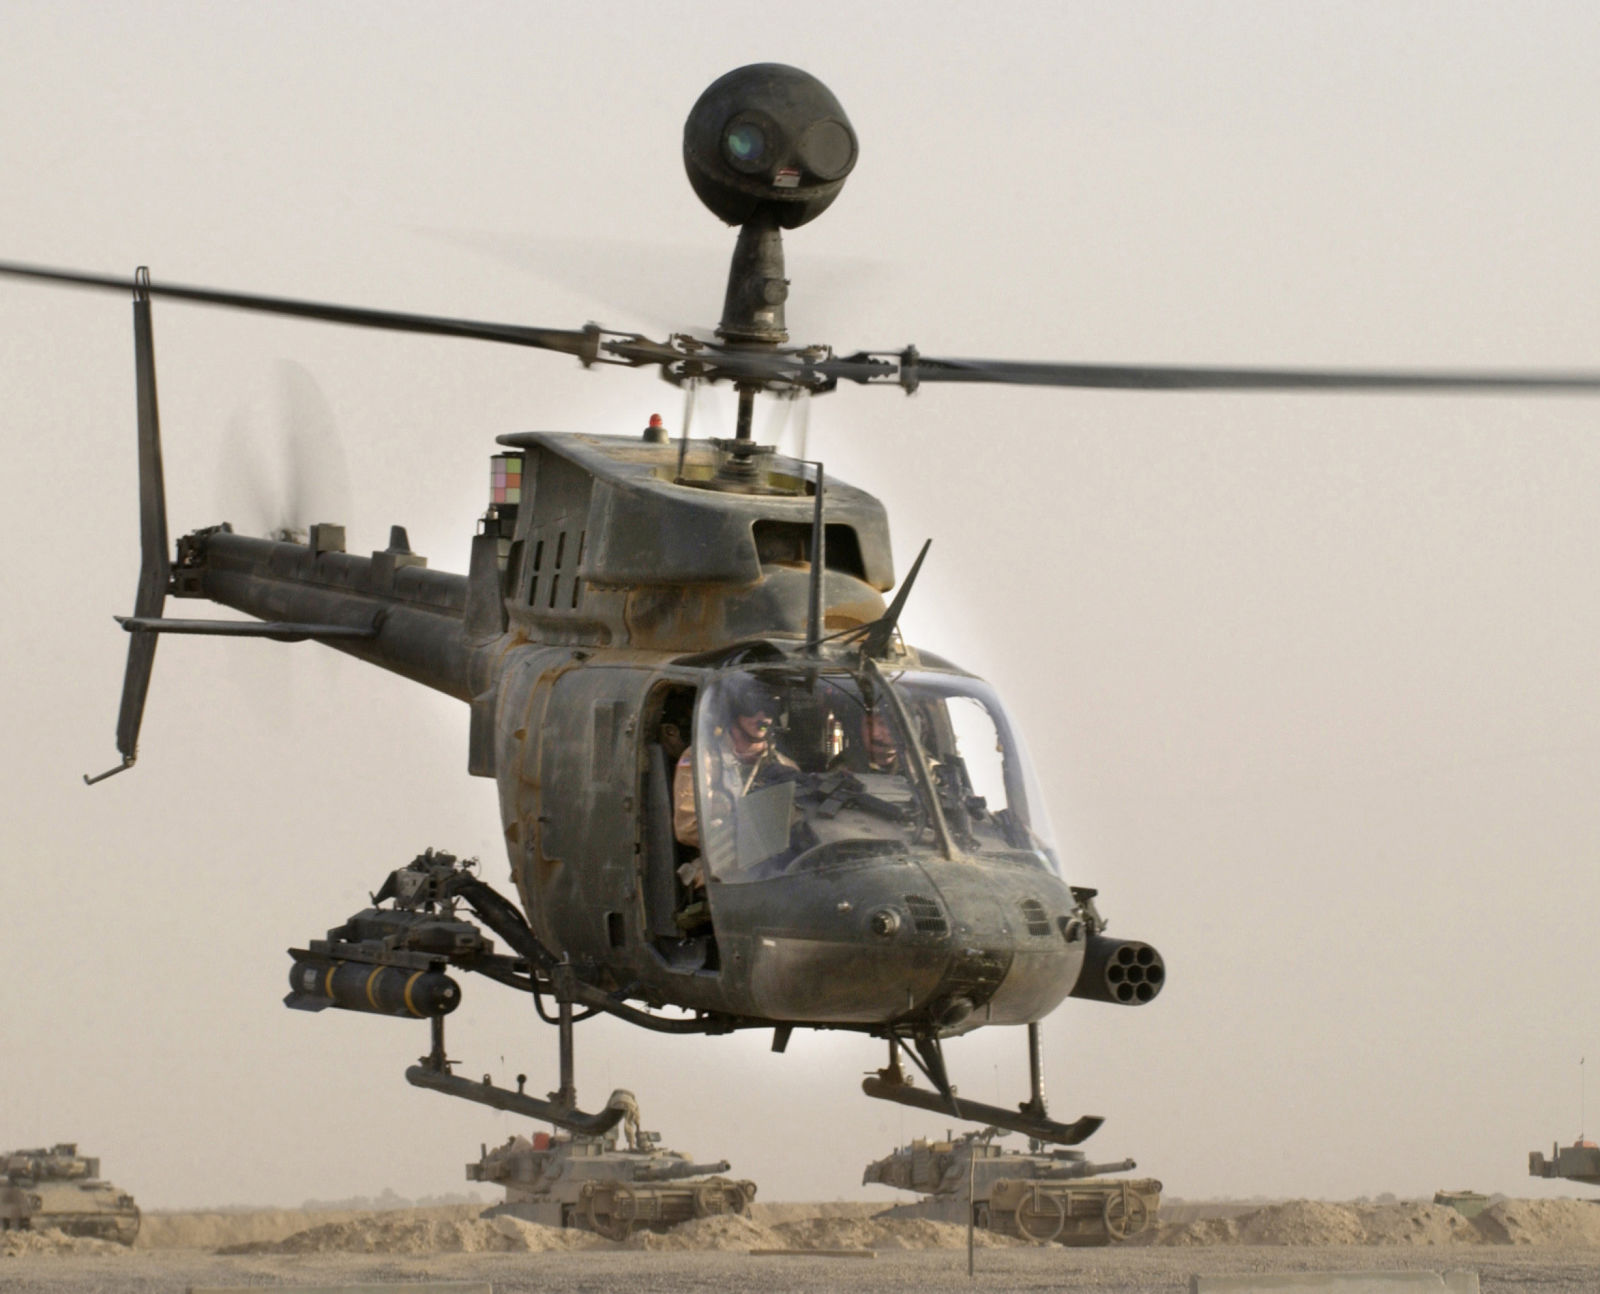 An OH-58D Kiowa Warrior helicopter from the 1st Infantry Division takes off on a mission from Forward Operation Base MacKenzie, Iraq. It is armed with an AGM-114 Hellfire and 7 Hydra 70 rockets.